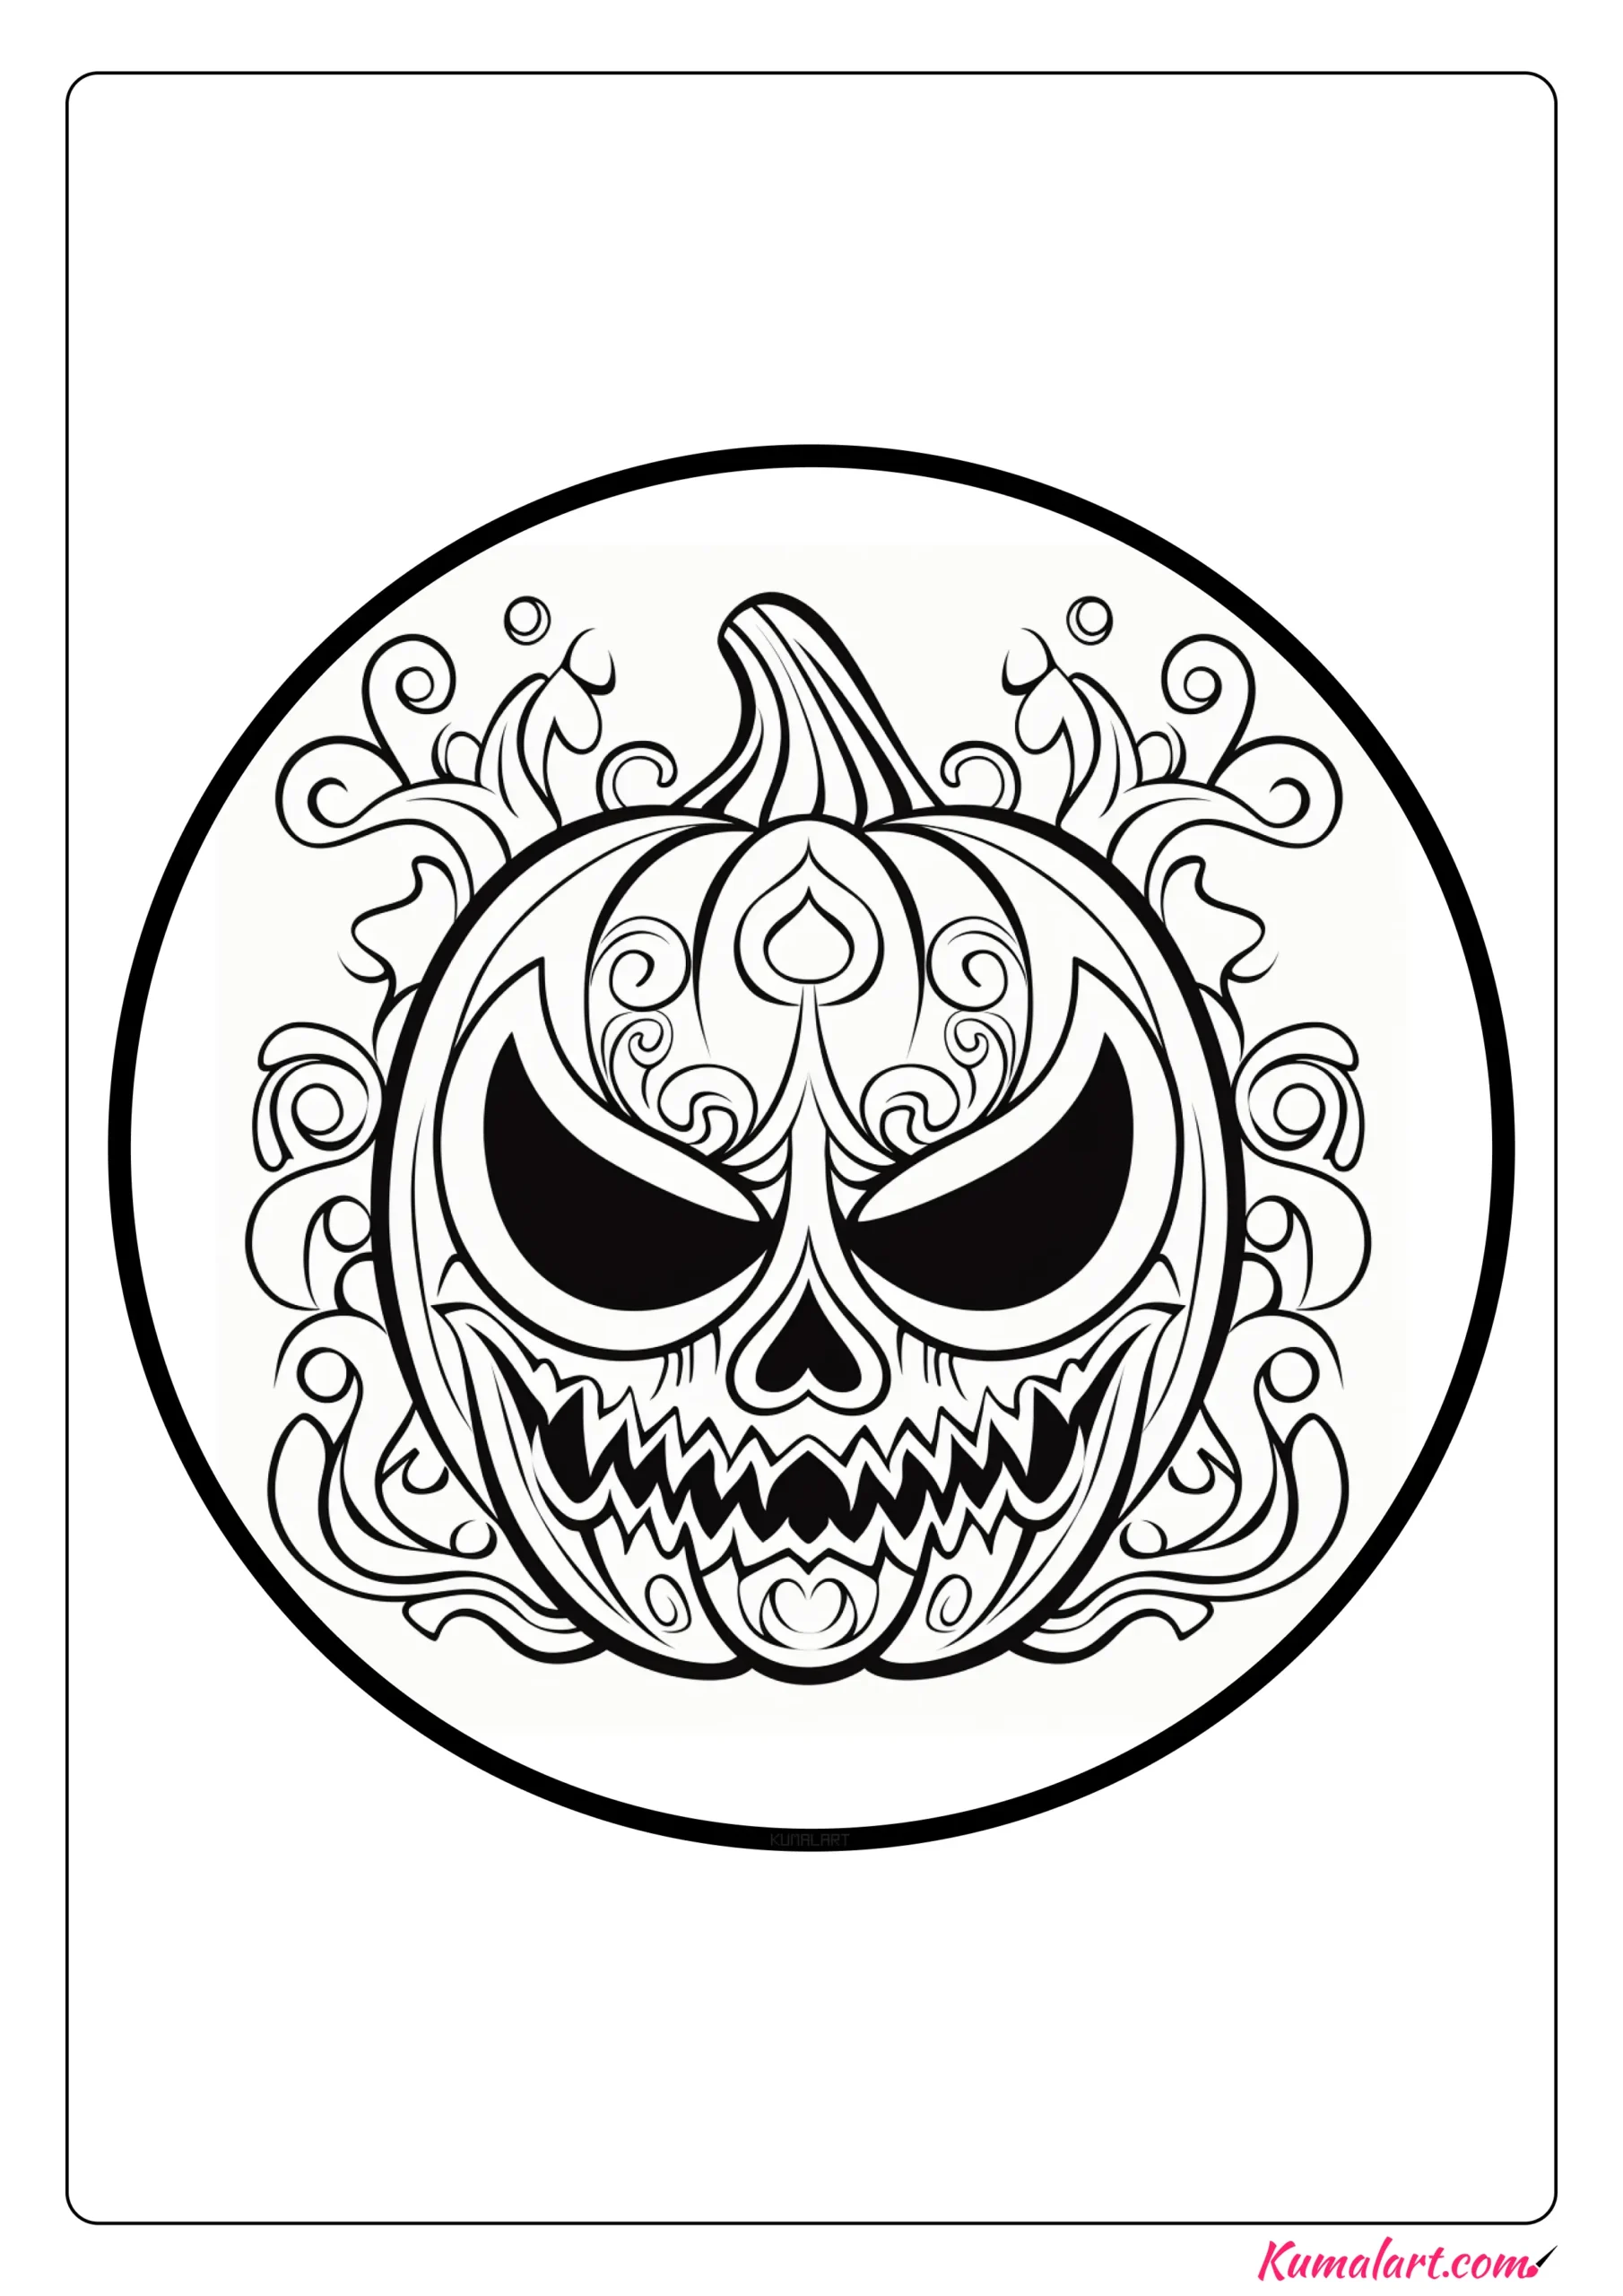 Horrifying Scary Pumpkin Coloring Page